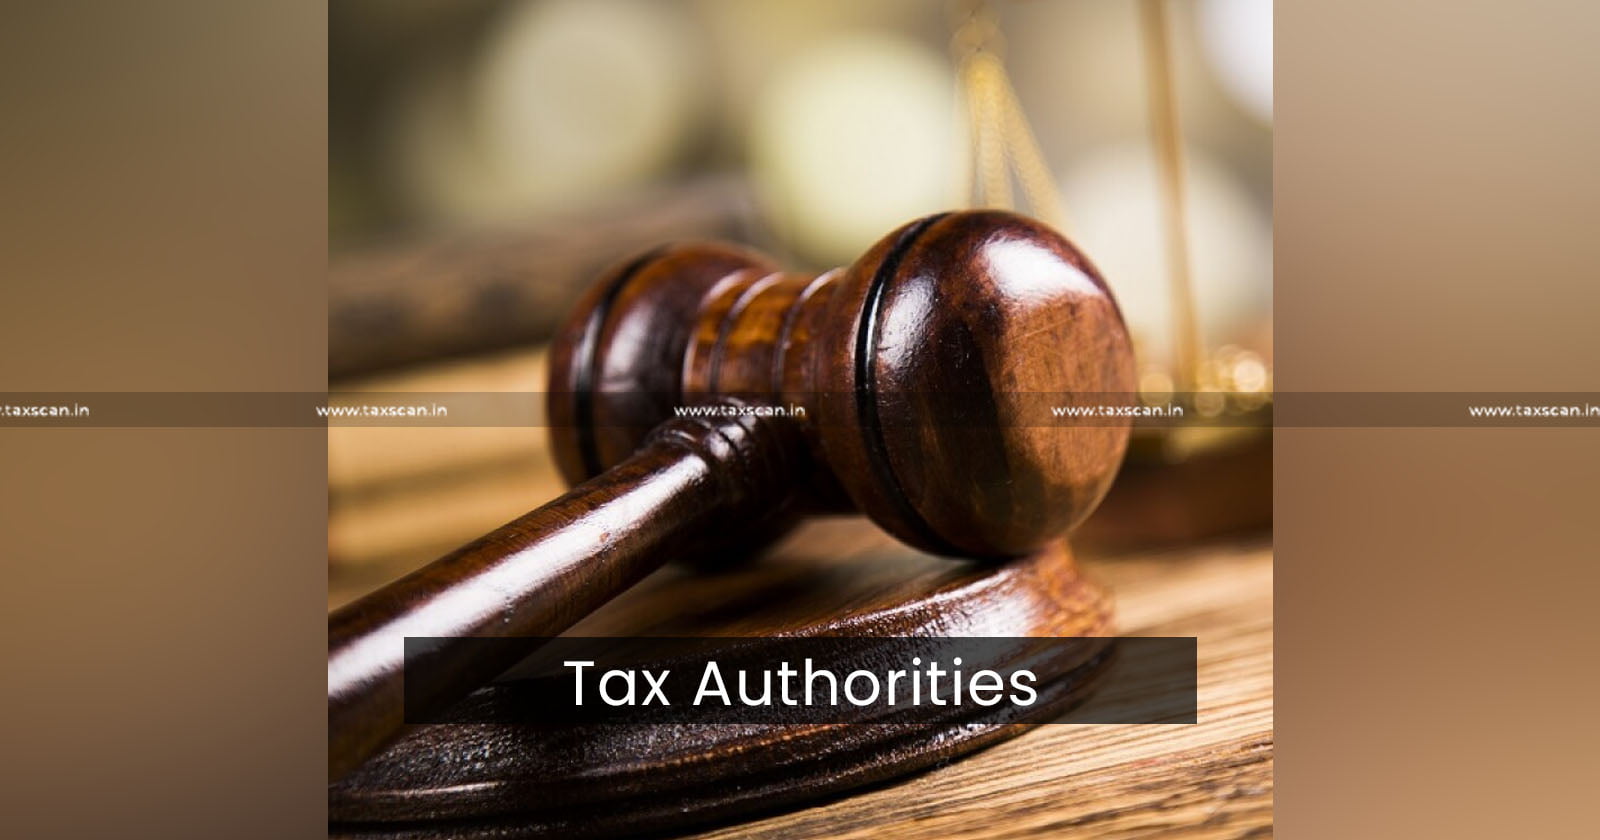 Delinquency - Lethargy - Tax Authorities - ITAT - Tax Authorities Attracts Cost - taxscan